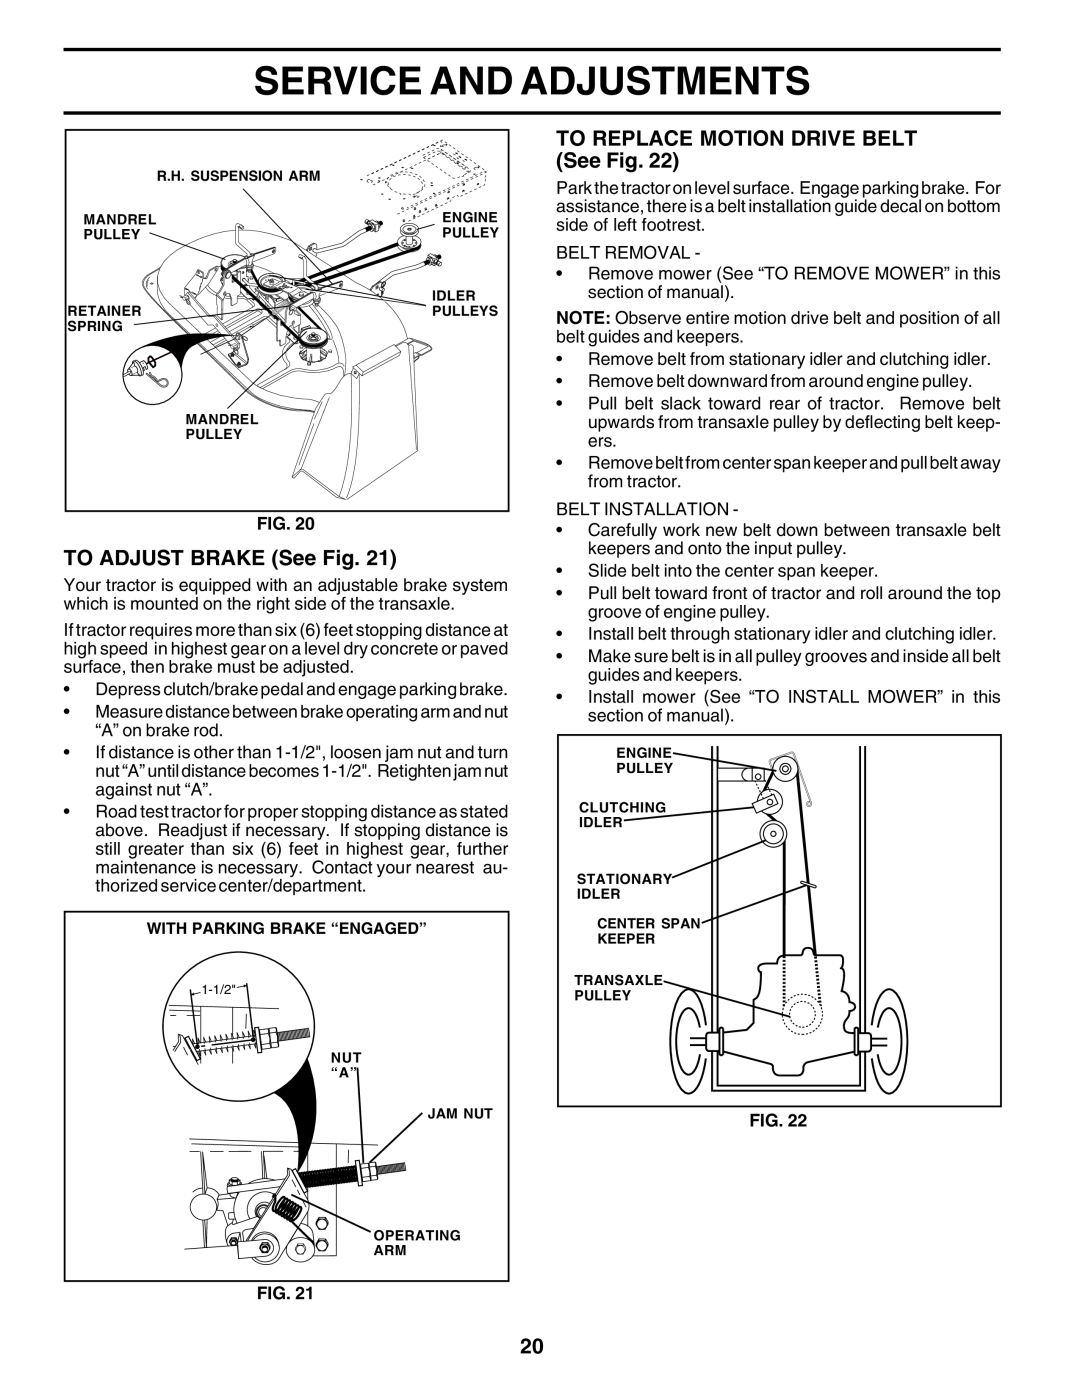 Poulan 183313 manual TO ADJUST BRAKE See Fig, TO REPLACE MOTION DRIVE BELT See Fig, Service And Adjustments 